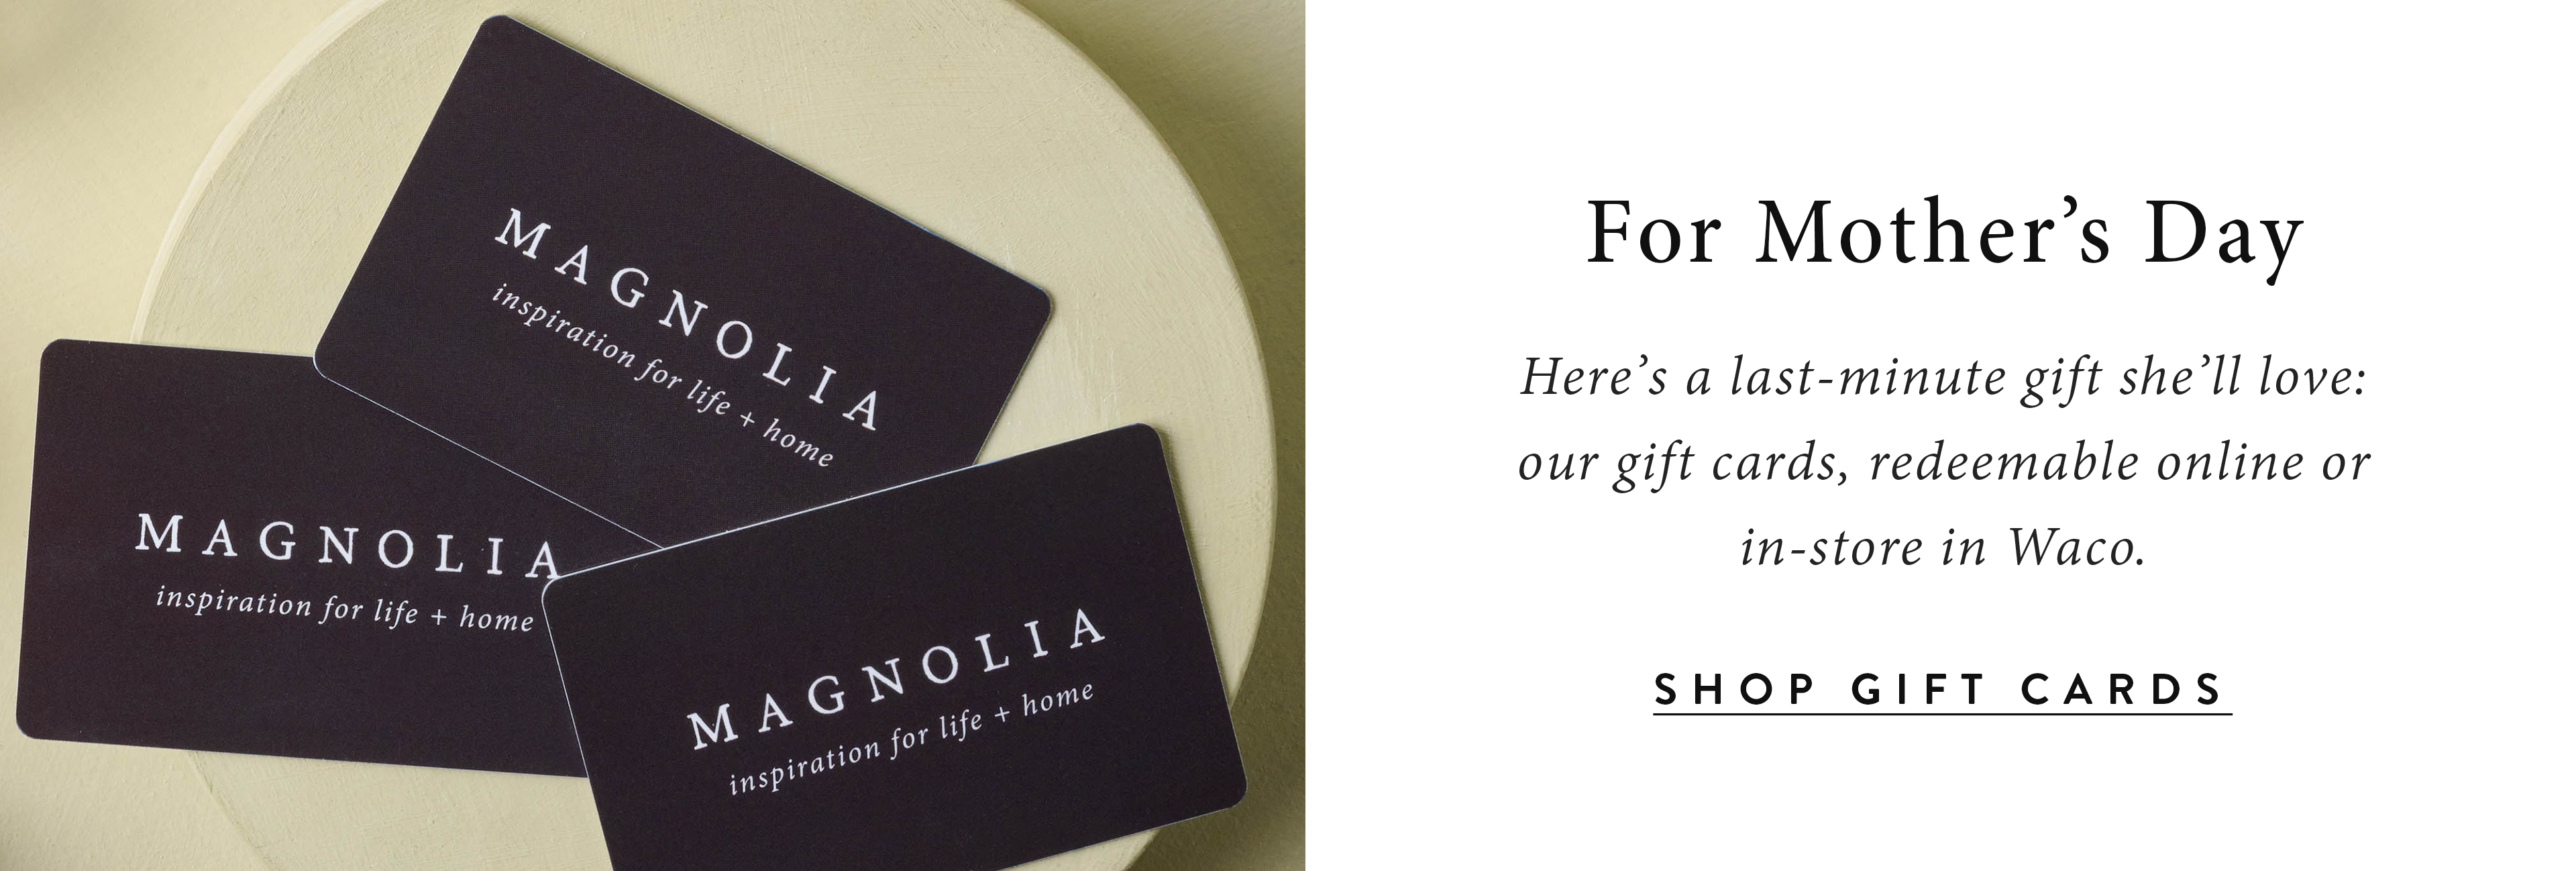 For Mother's Day.  Here's a last-minute gift she'll love: our gifts cards, redeemable online or in-store in Waco.  shop gift cards.